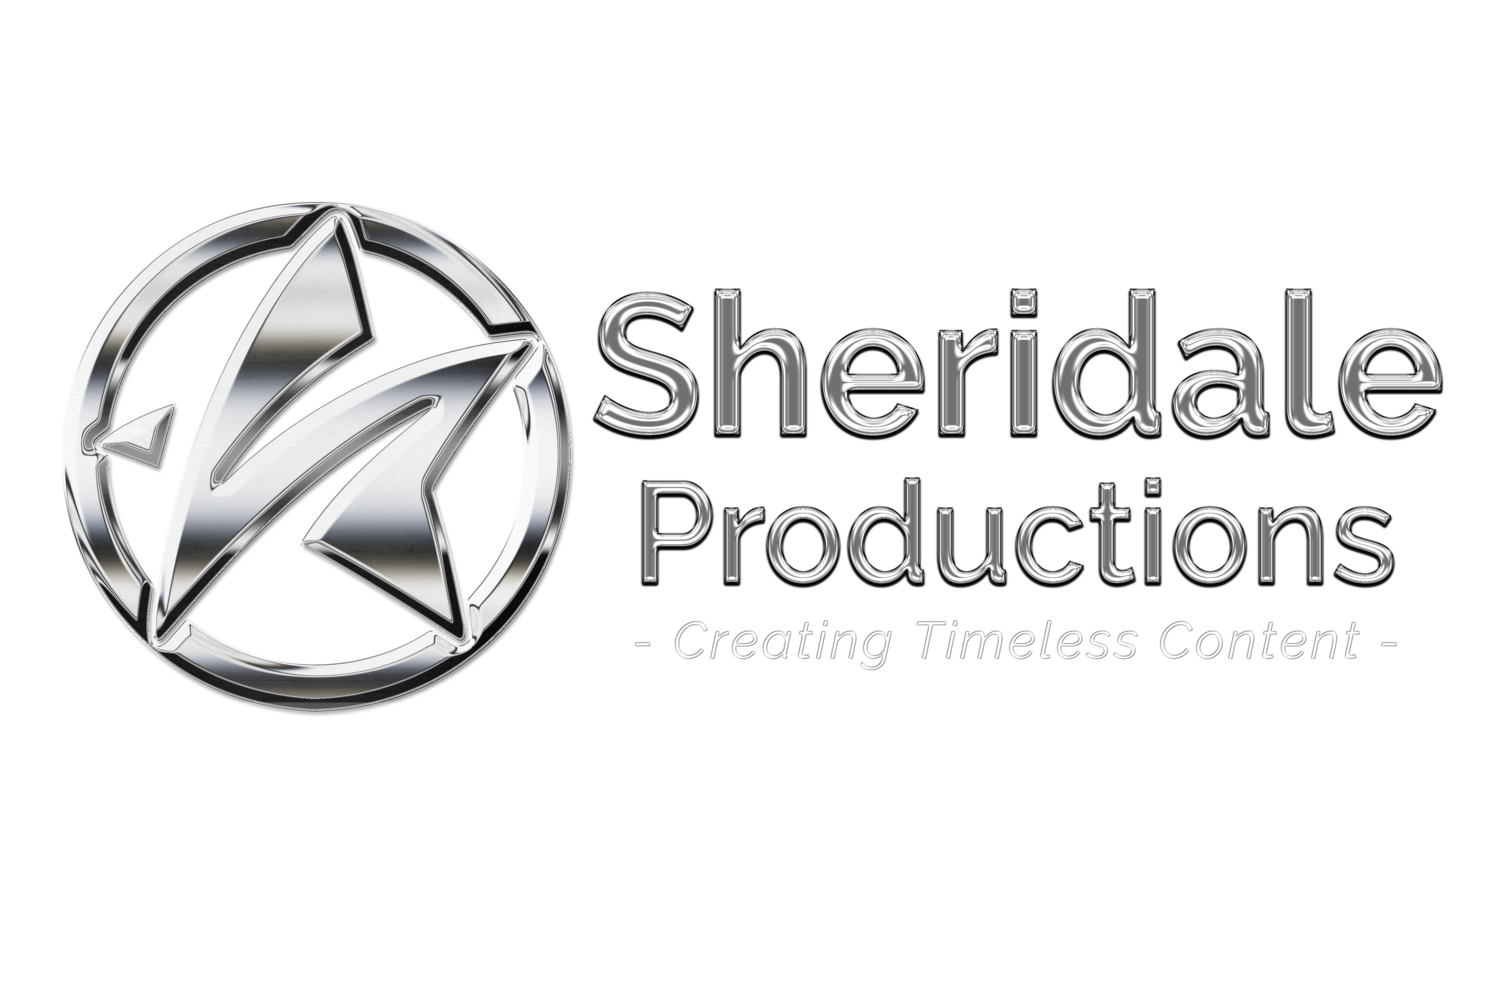  Sheridale Productions